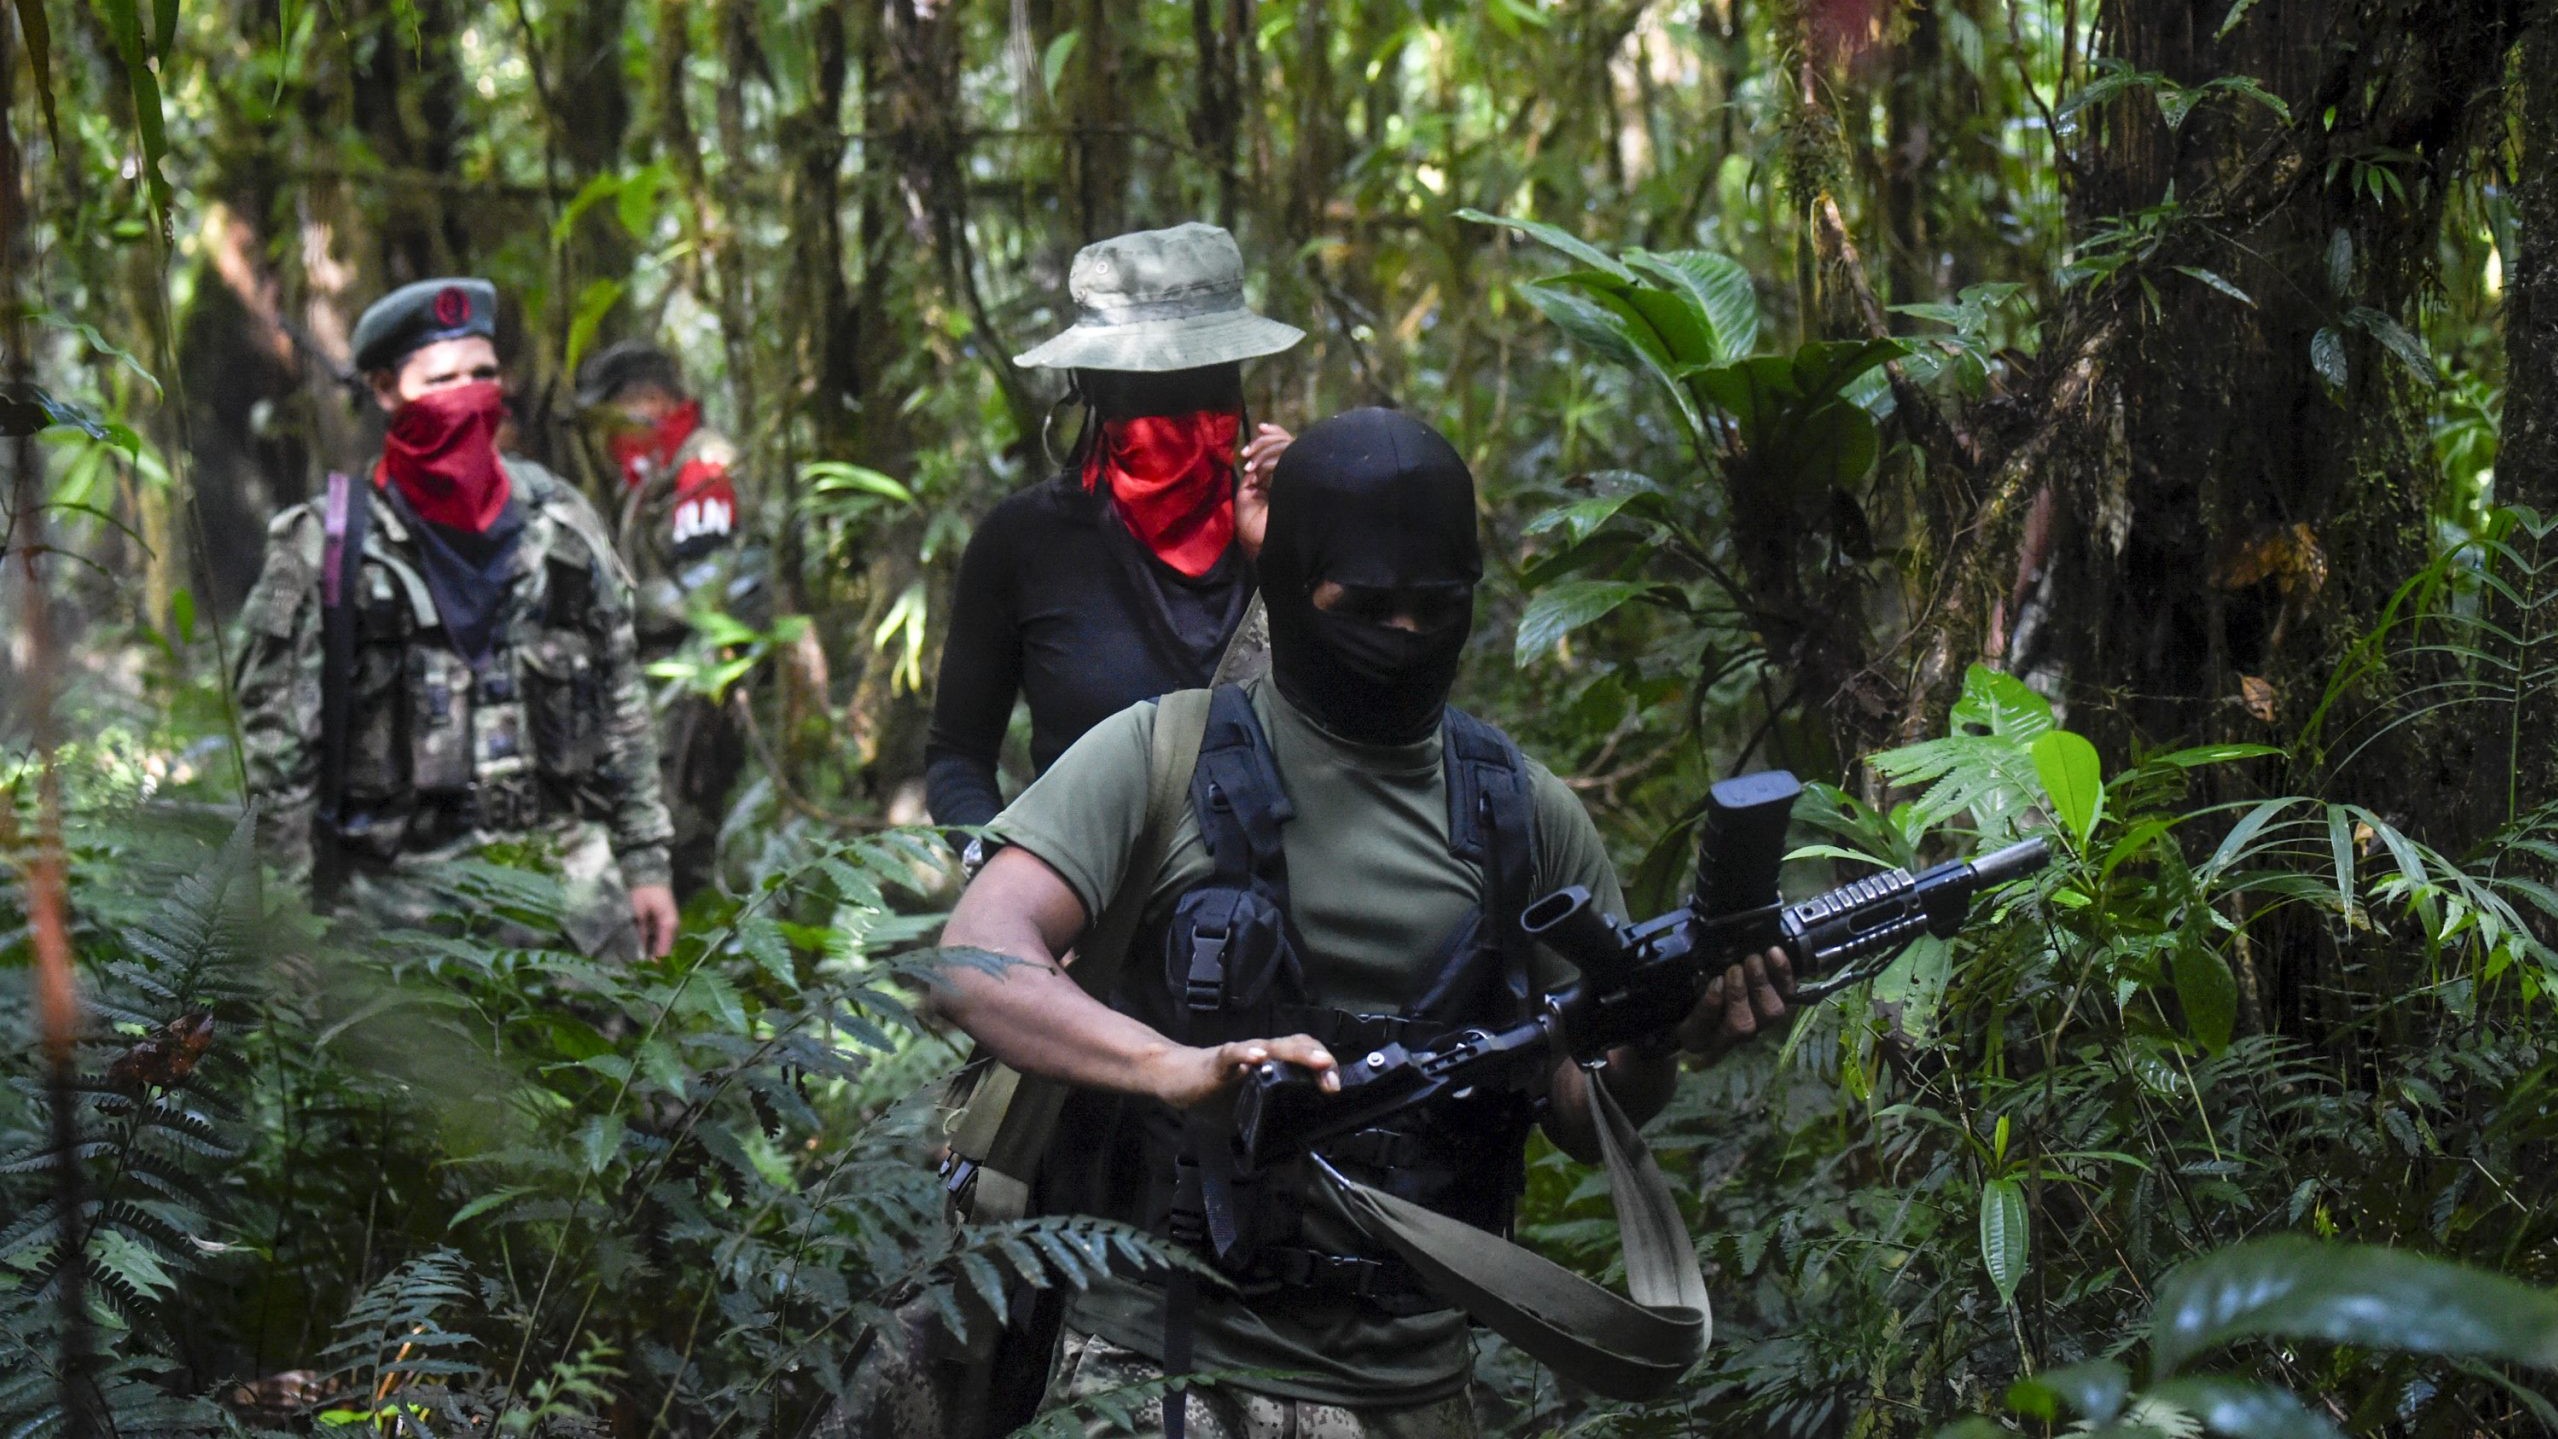 The reinforcing activities of the ELN in Colombia and Venezuela